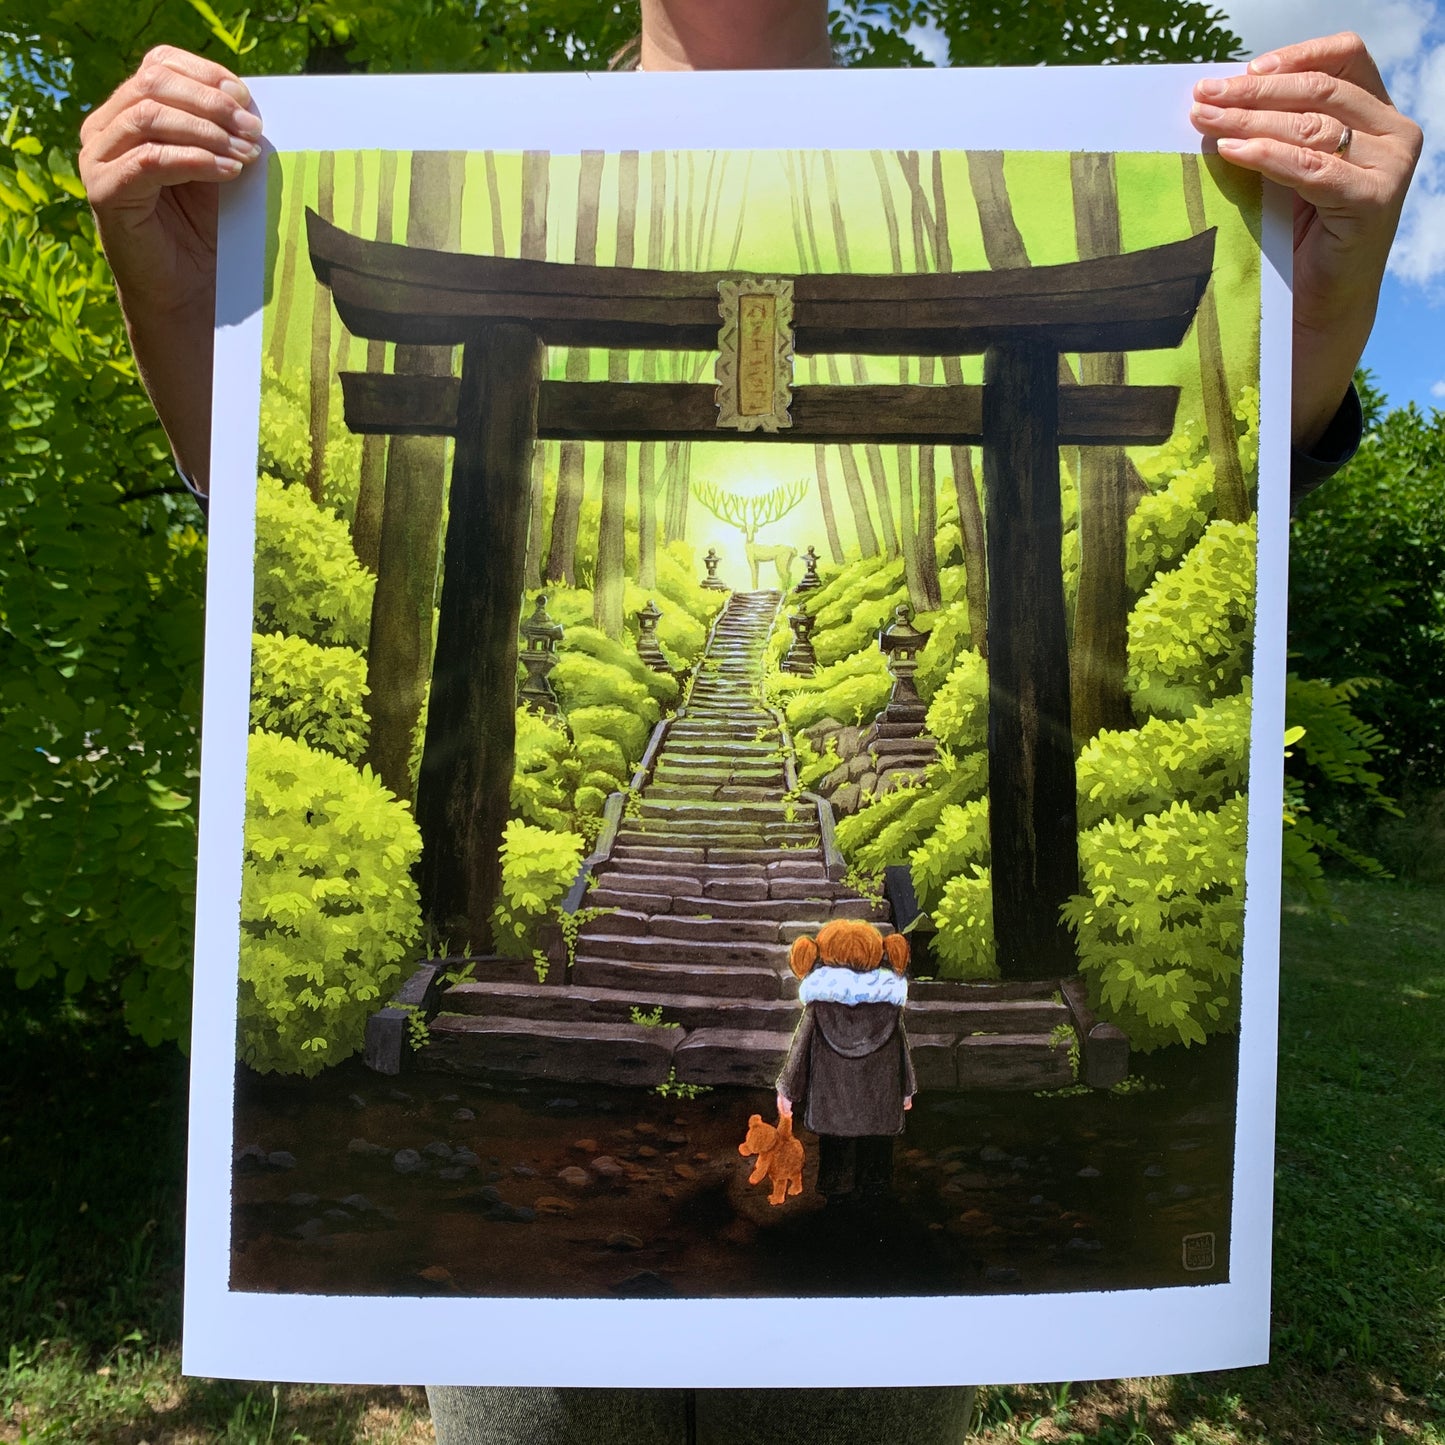 Watercolor 'Shinto Gate' extra large as a poster 50x60cm